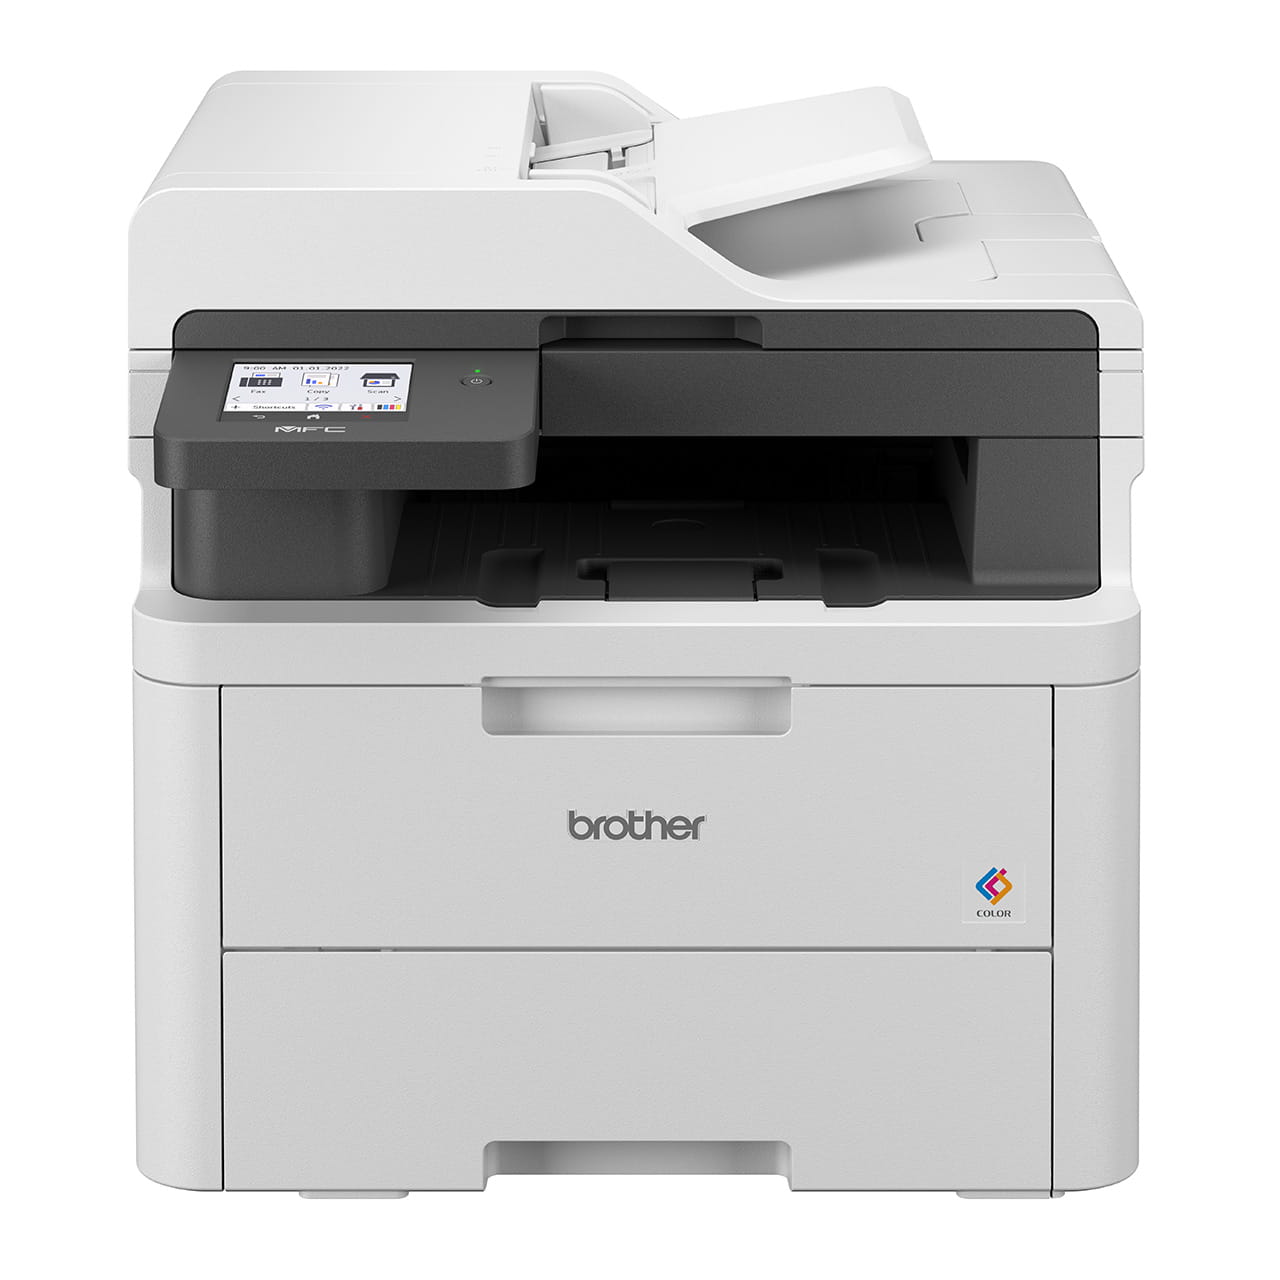 Brother MFC-L3755CDW Colour Laser Printer Front View